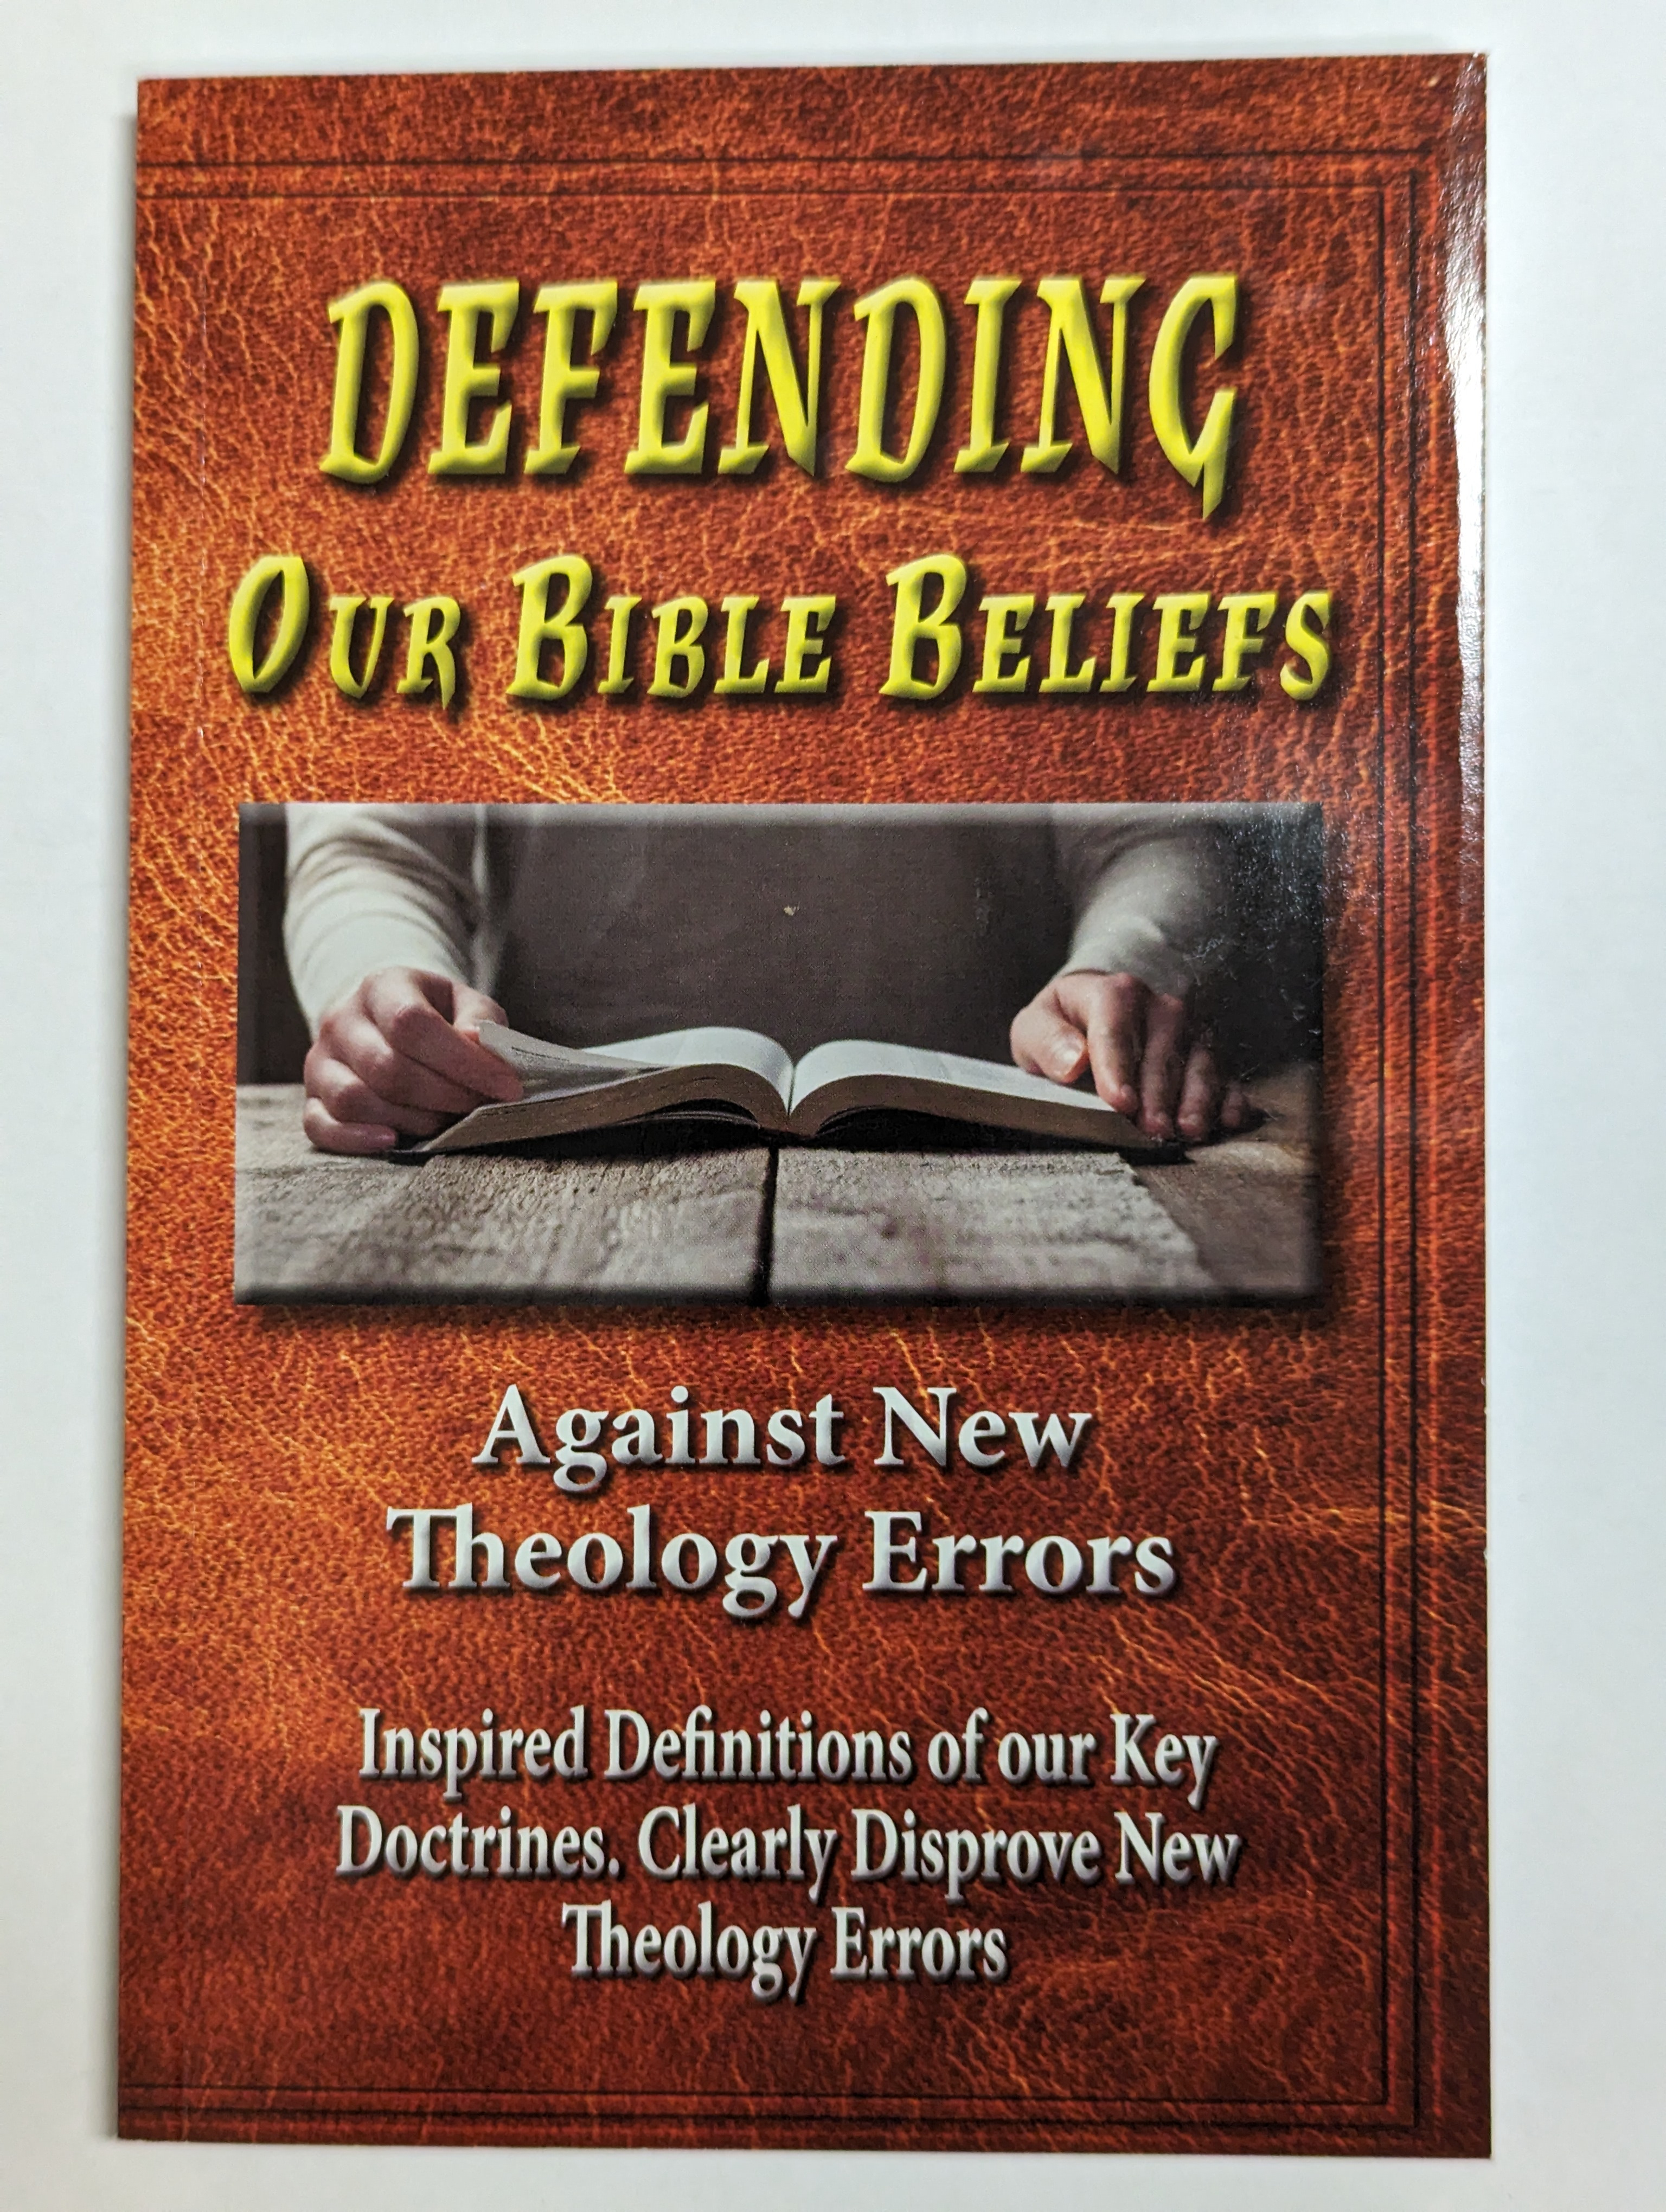 Defending Our Bible Beliefs Against New Theology Errors